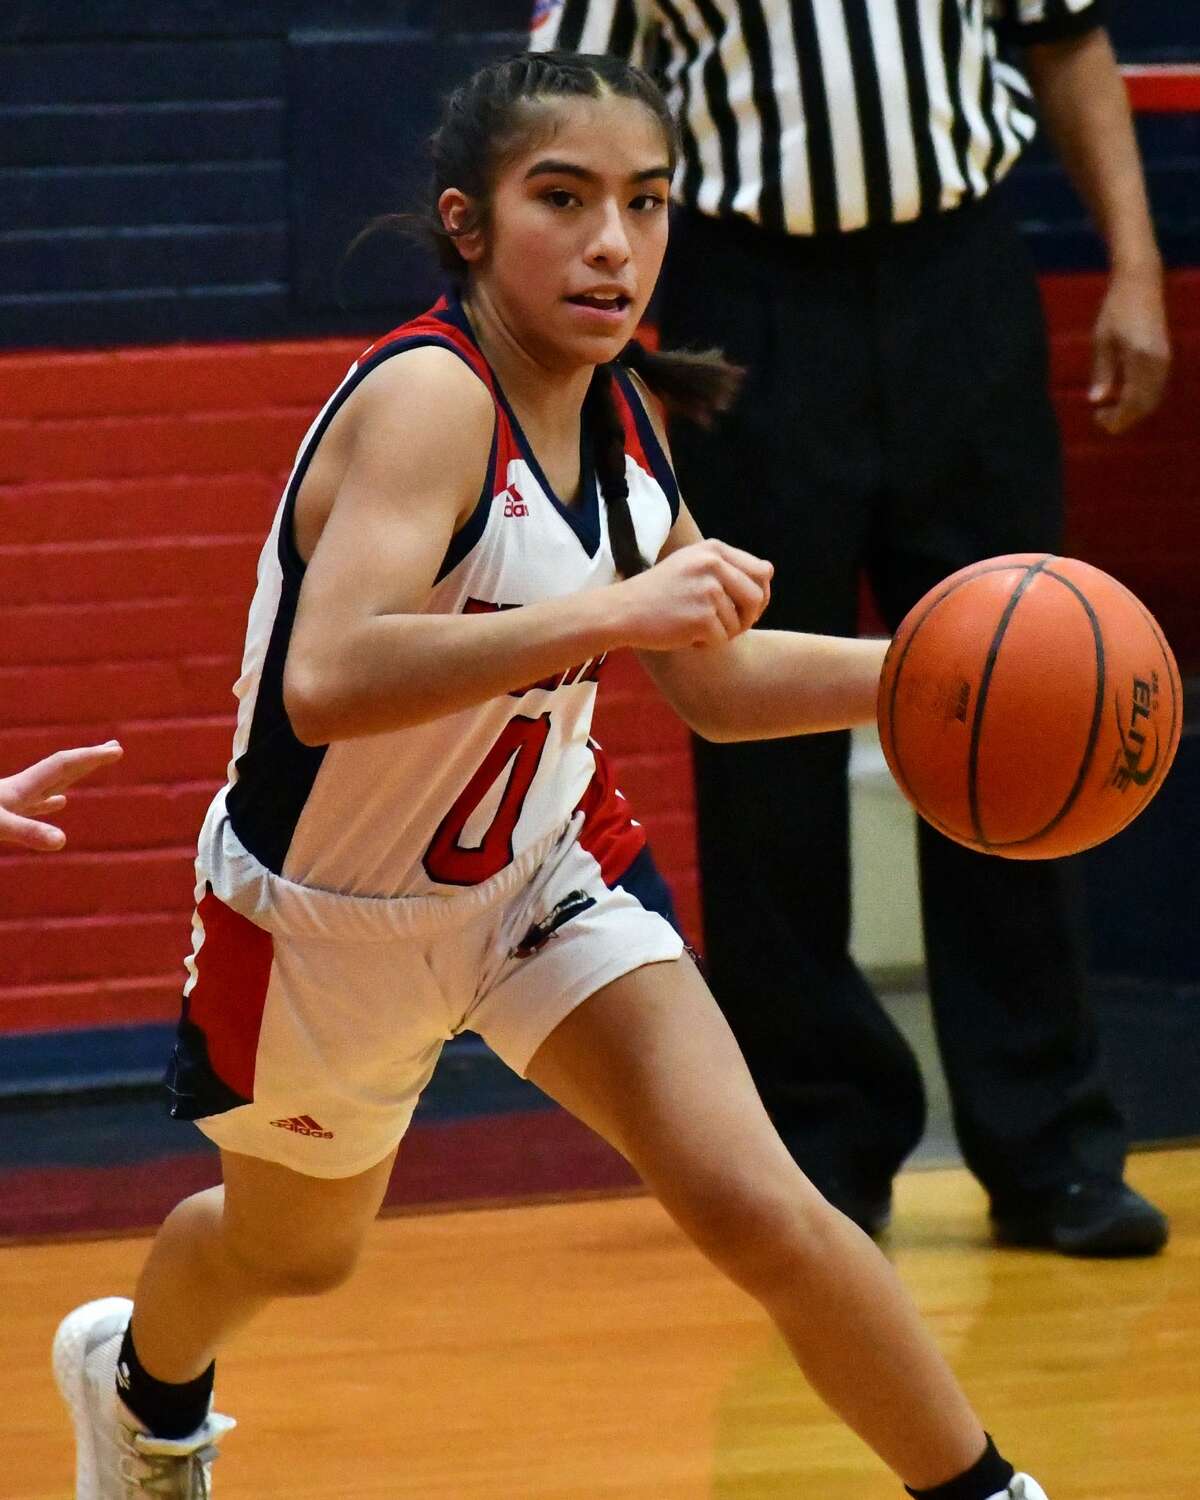 The Plainview Lady Bulldogs rolled to a 91-35 win over Lubbock Trinity Christian in a non-district girls basketball game on Friday, Dec. 18, 2020 in the Dog House at Plainview High School